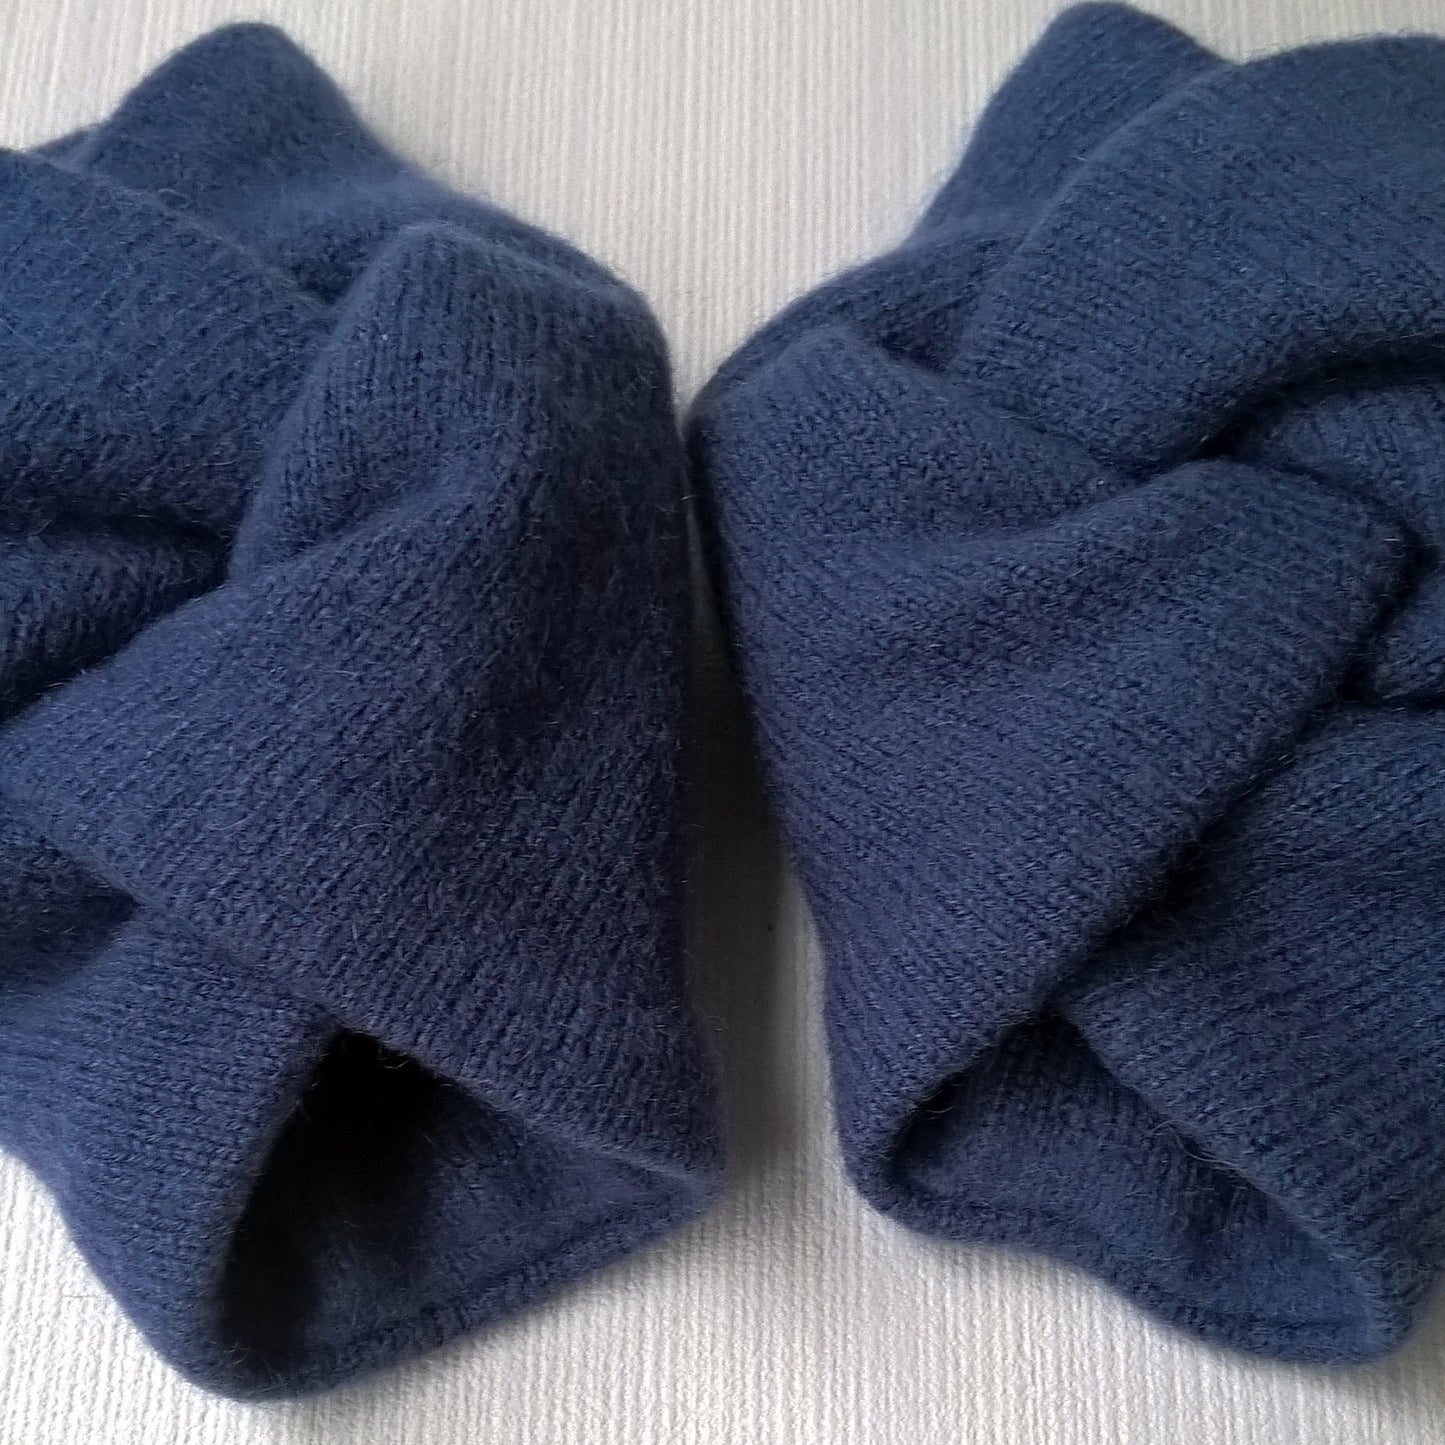 A double layer of cashmere make these wrist warmers extra warm